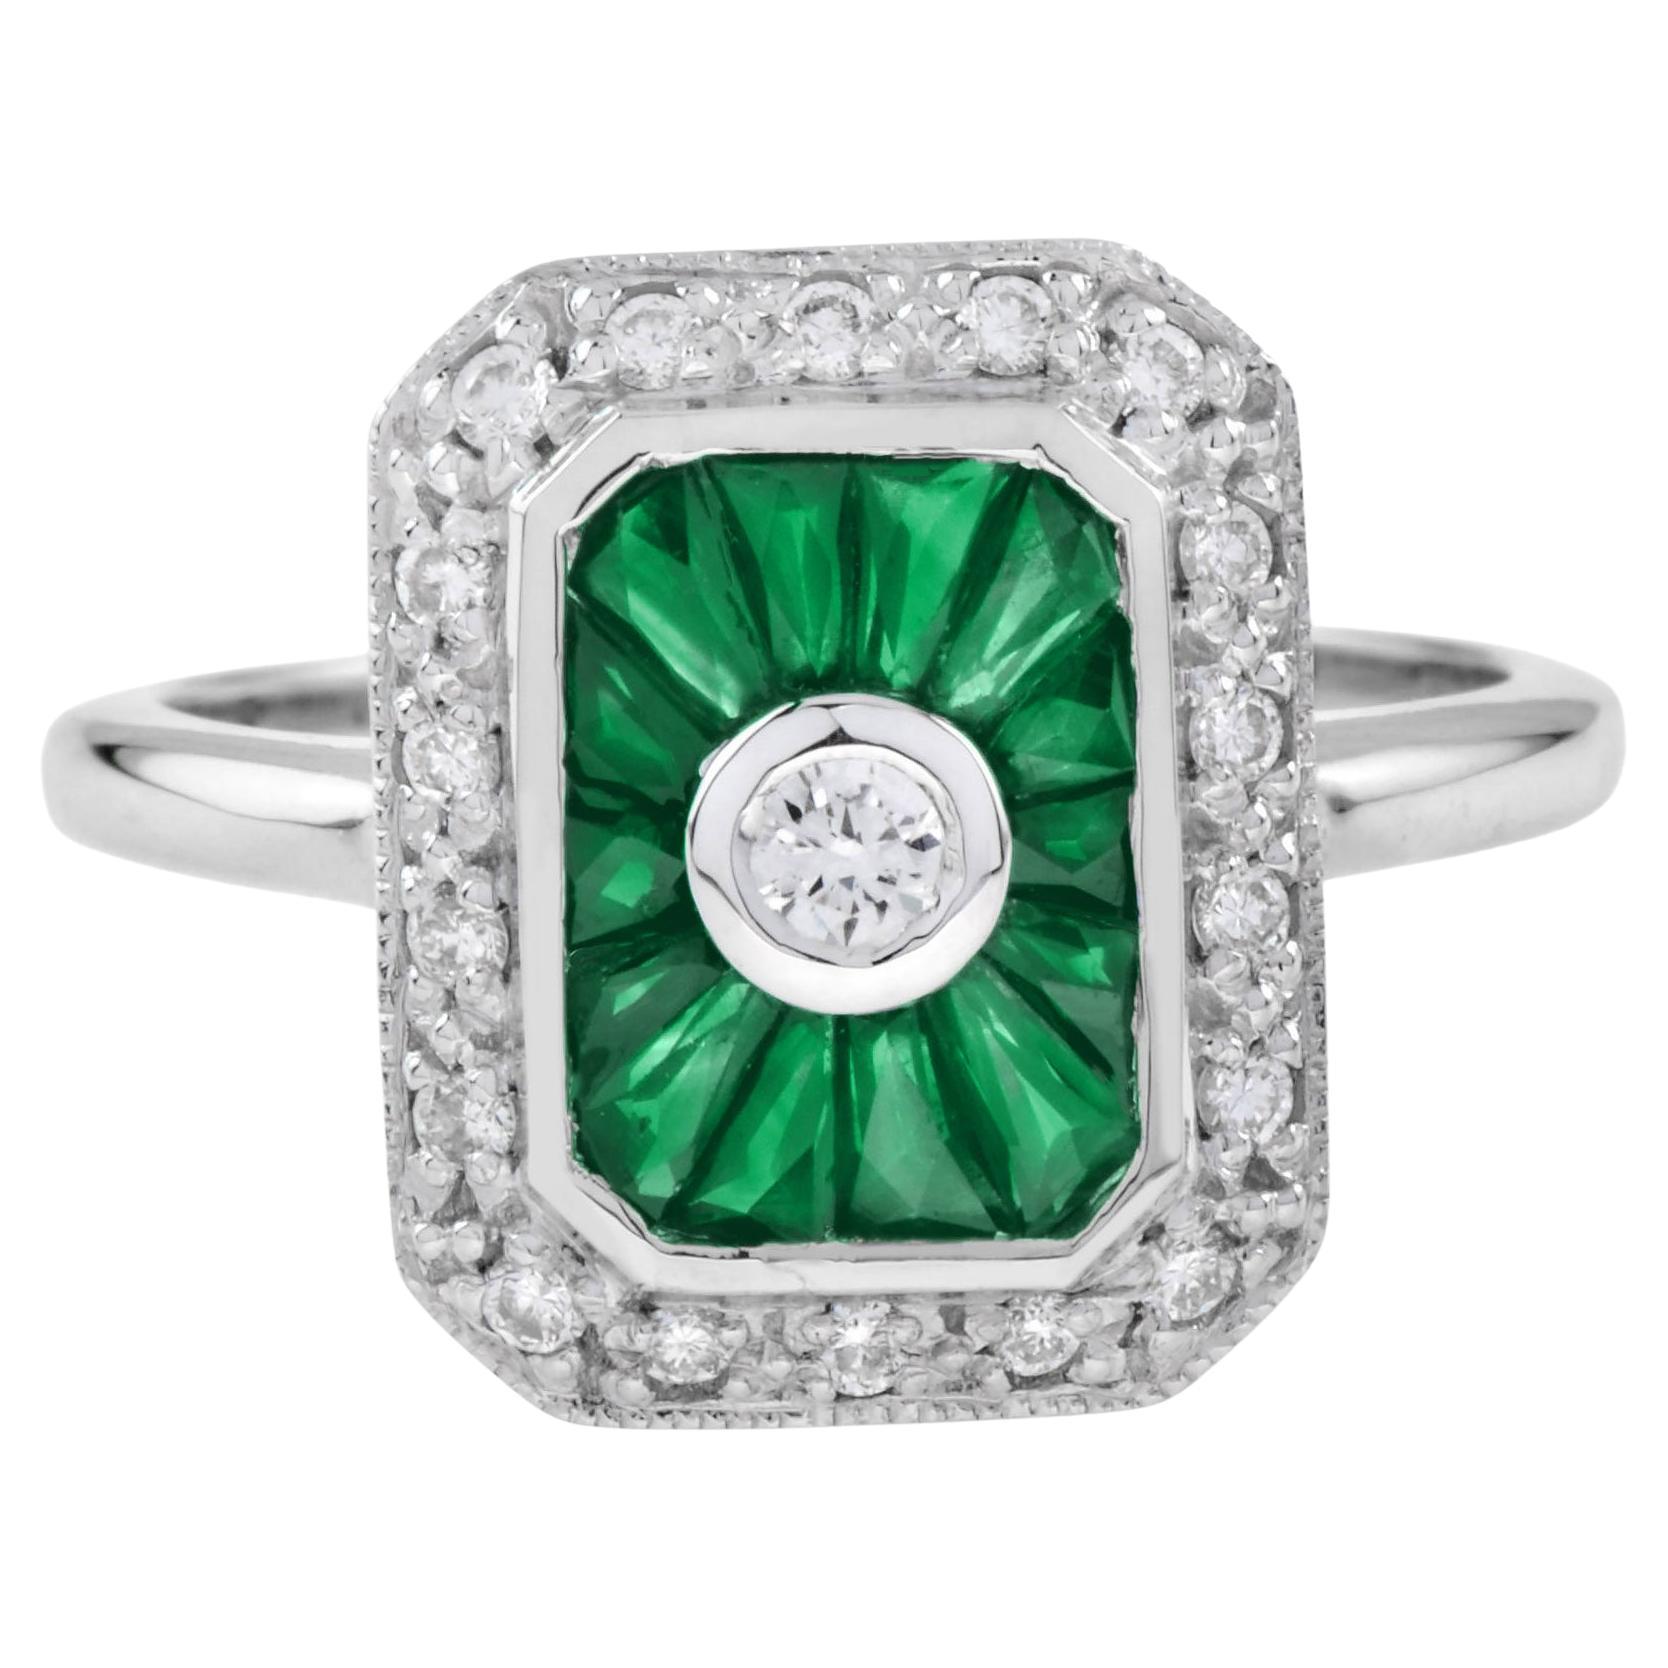 Diamond and Emerald Halo Art Deco Style Engagement Ring in 14K White Gold